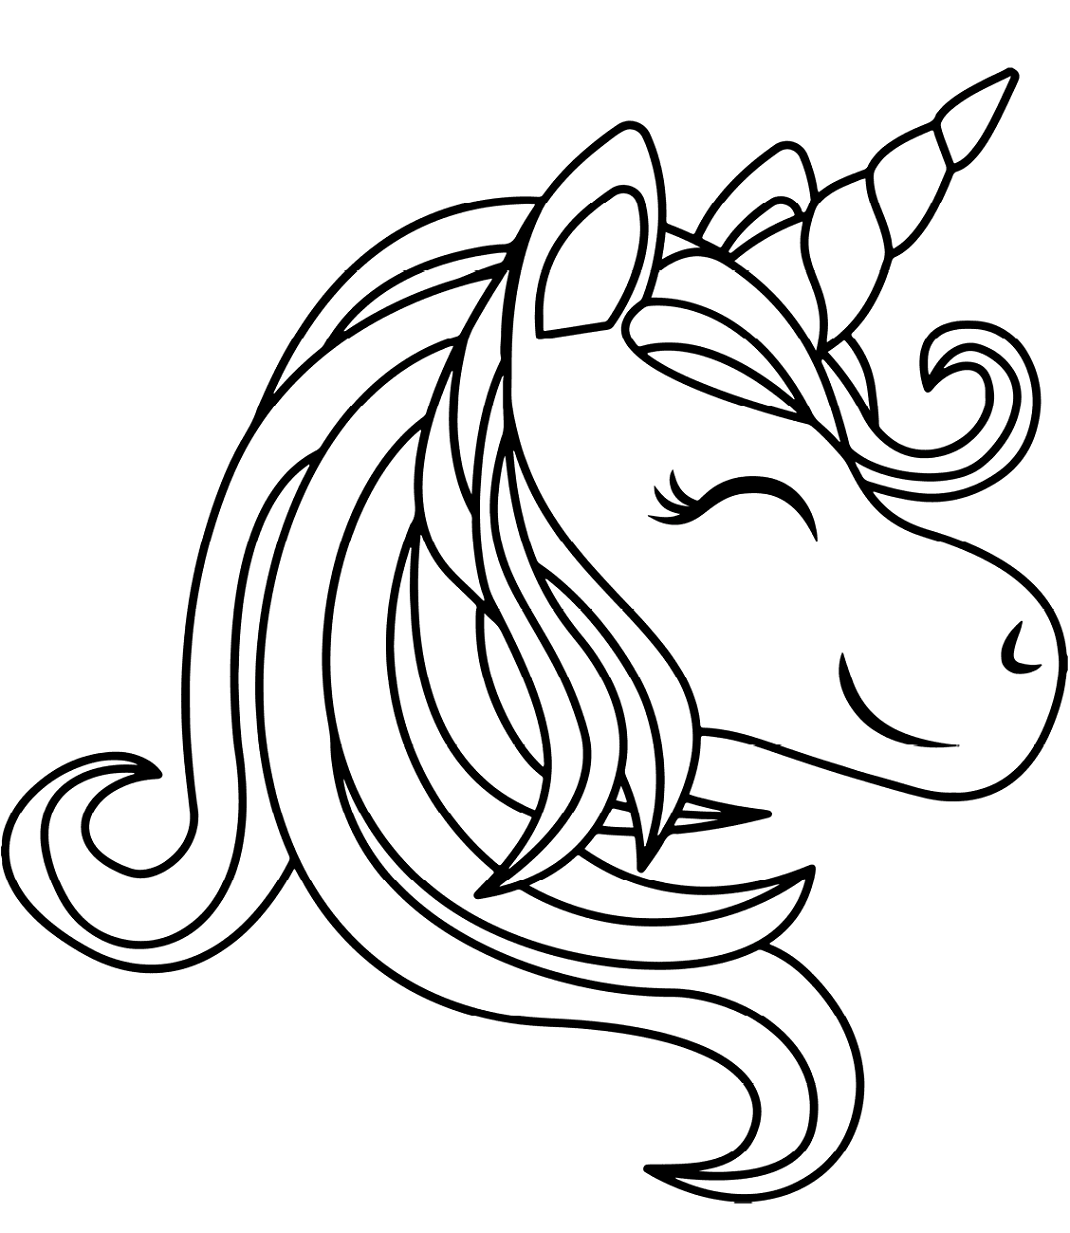 Download Unicorn Head Smiling Coloring Page - Free Printable ...